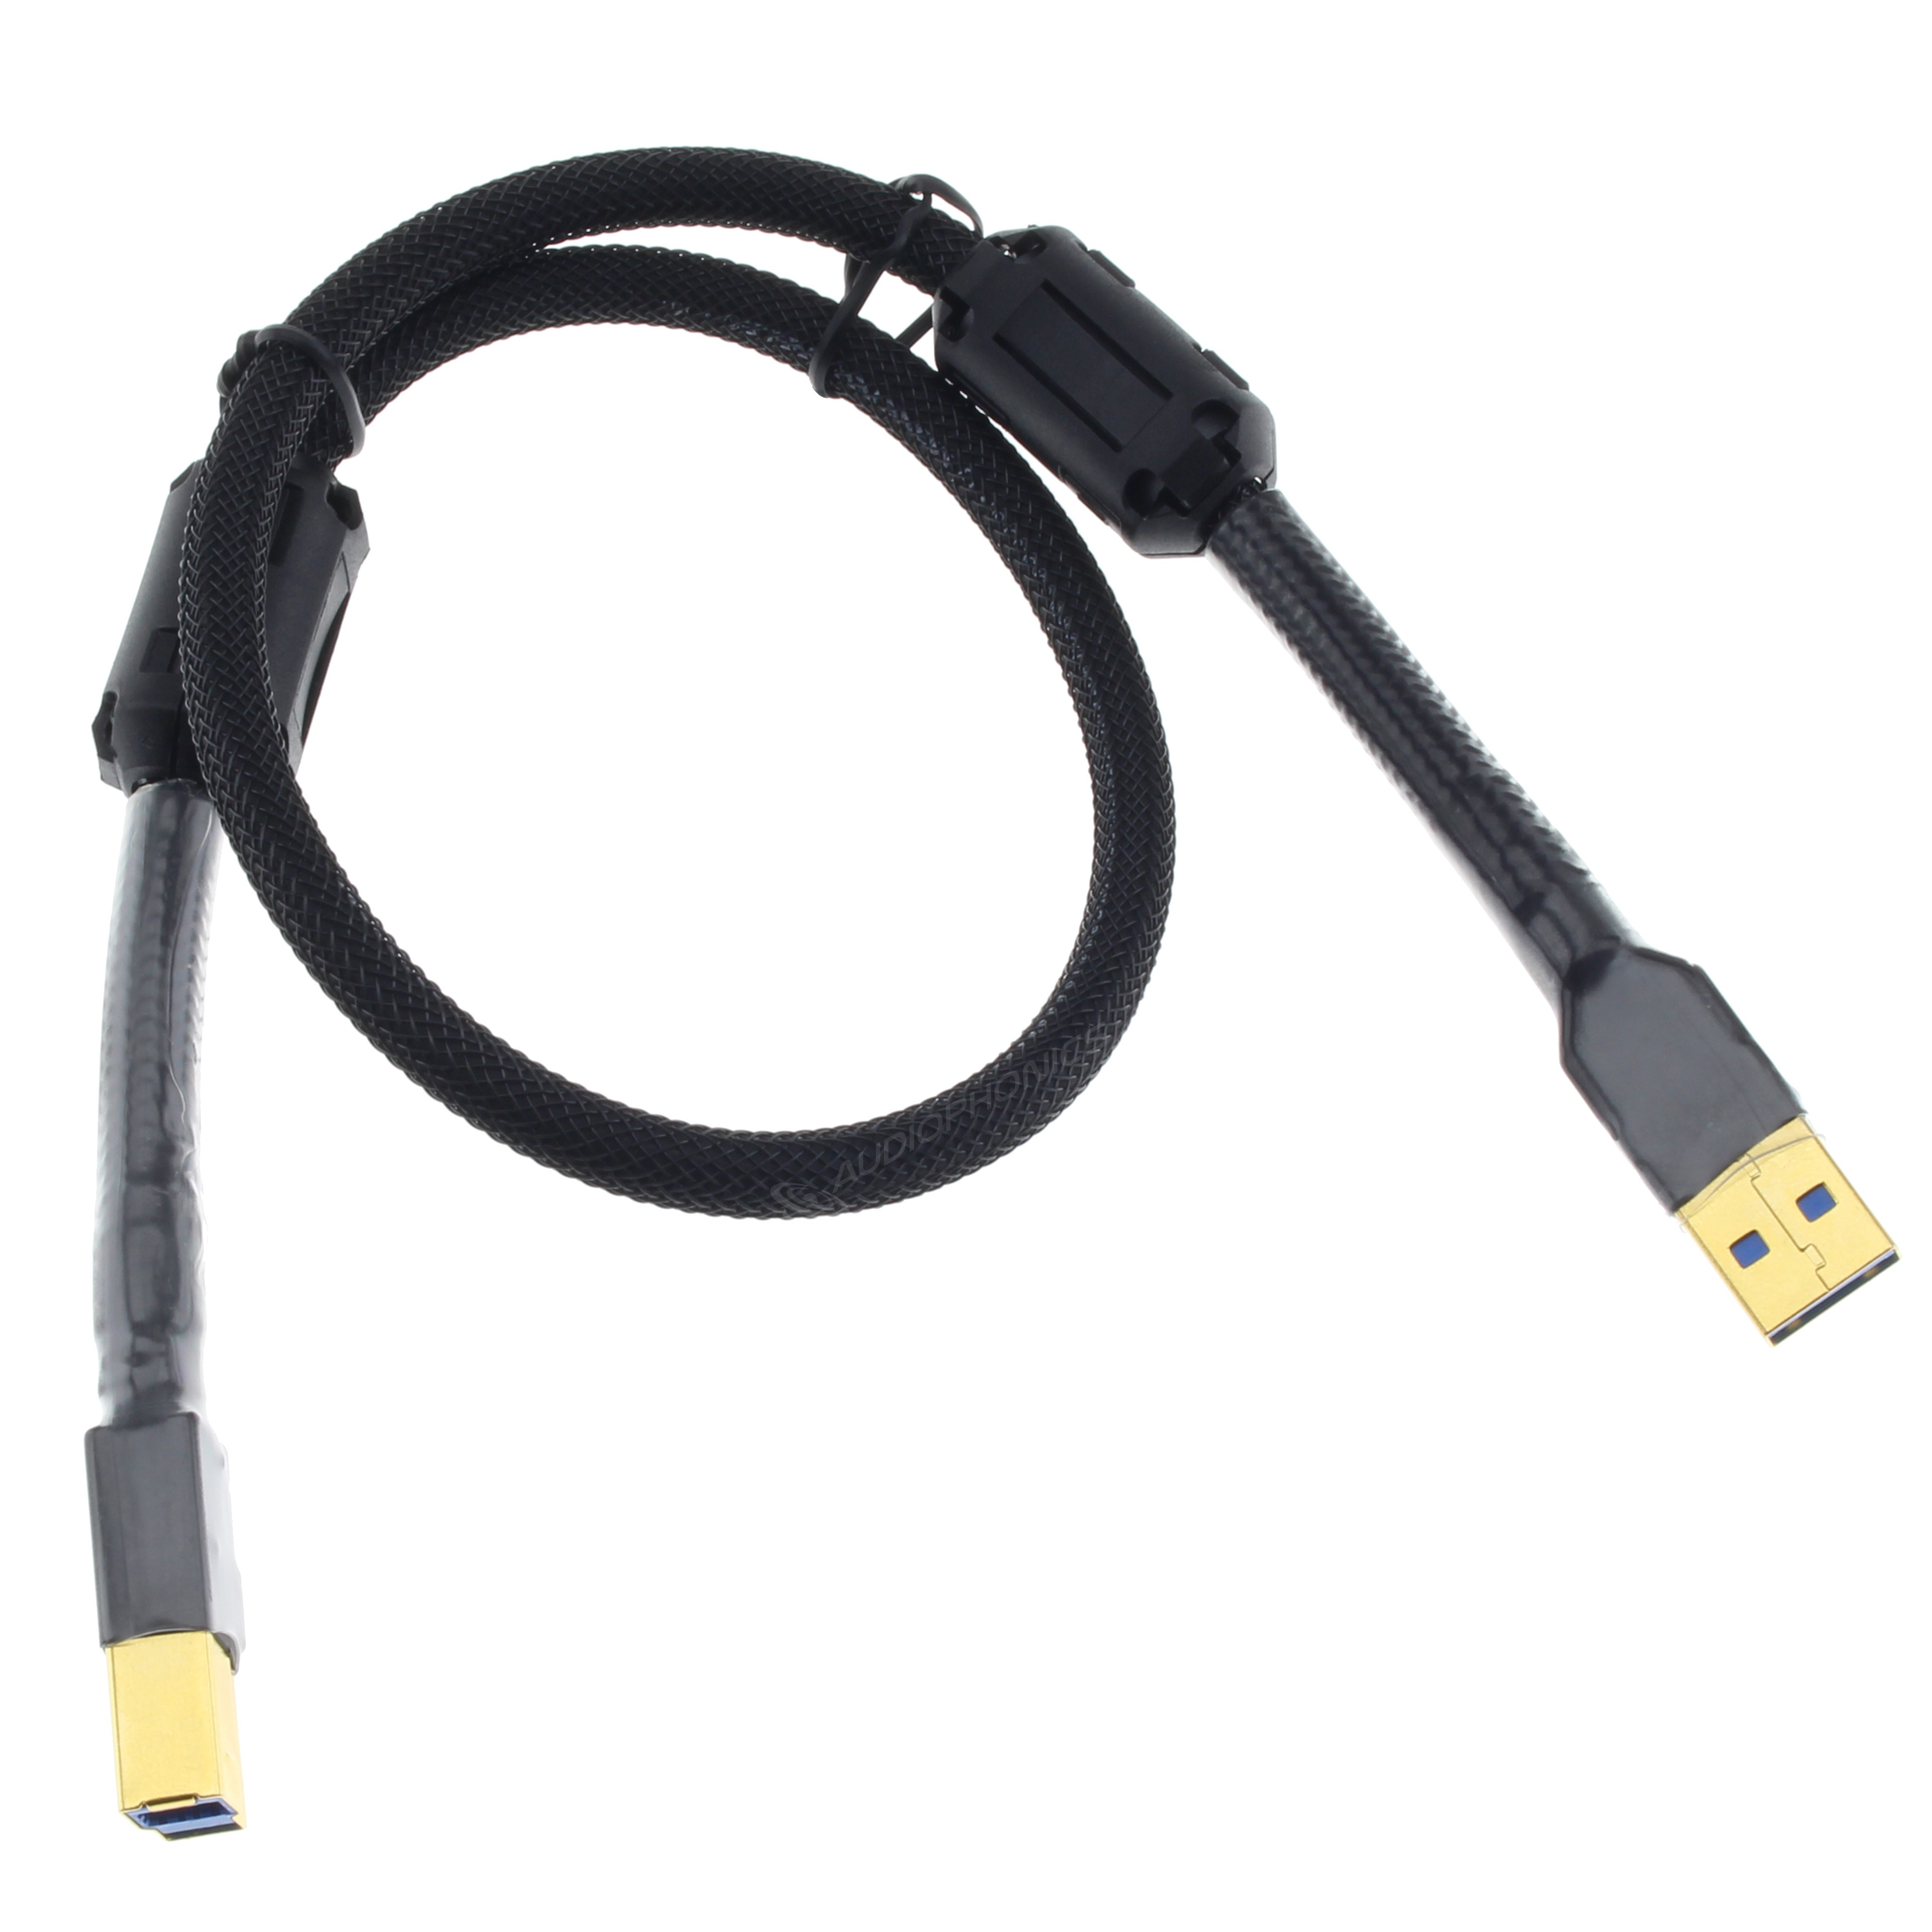 Cable USB-A to USB-B 3.0 Shielded OFC Copper Gold-plated 0.5m